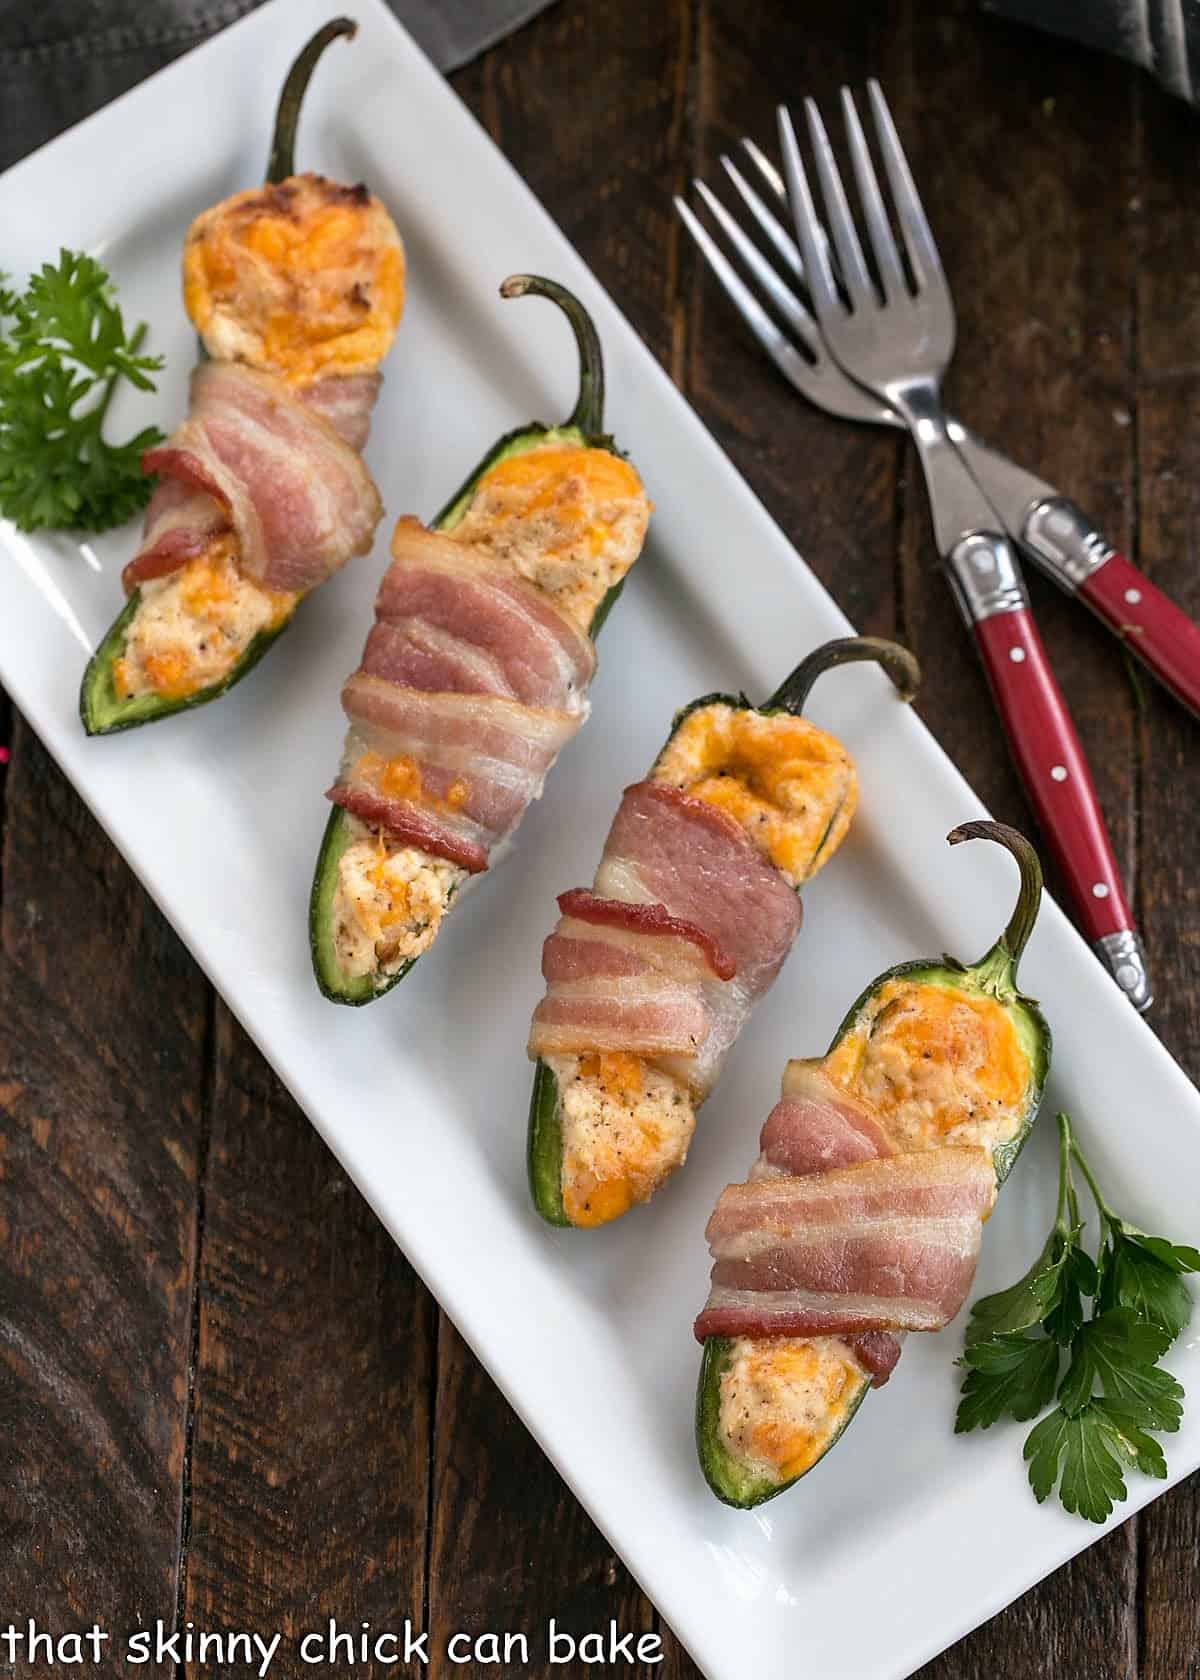 Overhead view of 4 jalapeno poppers on a white tray with 2 red handled forks.